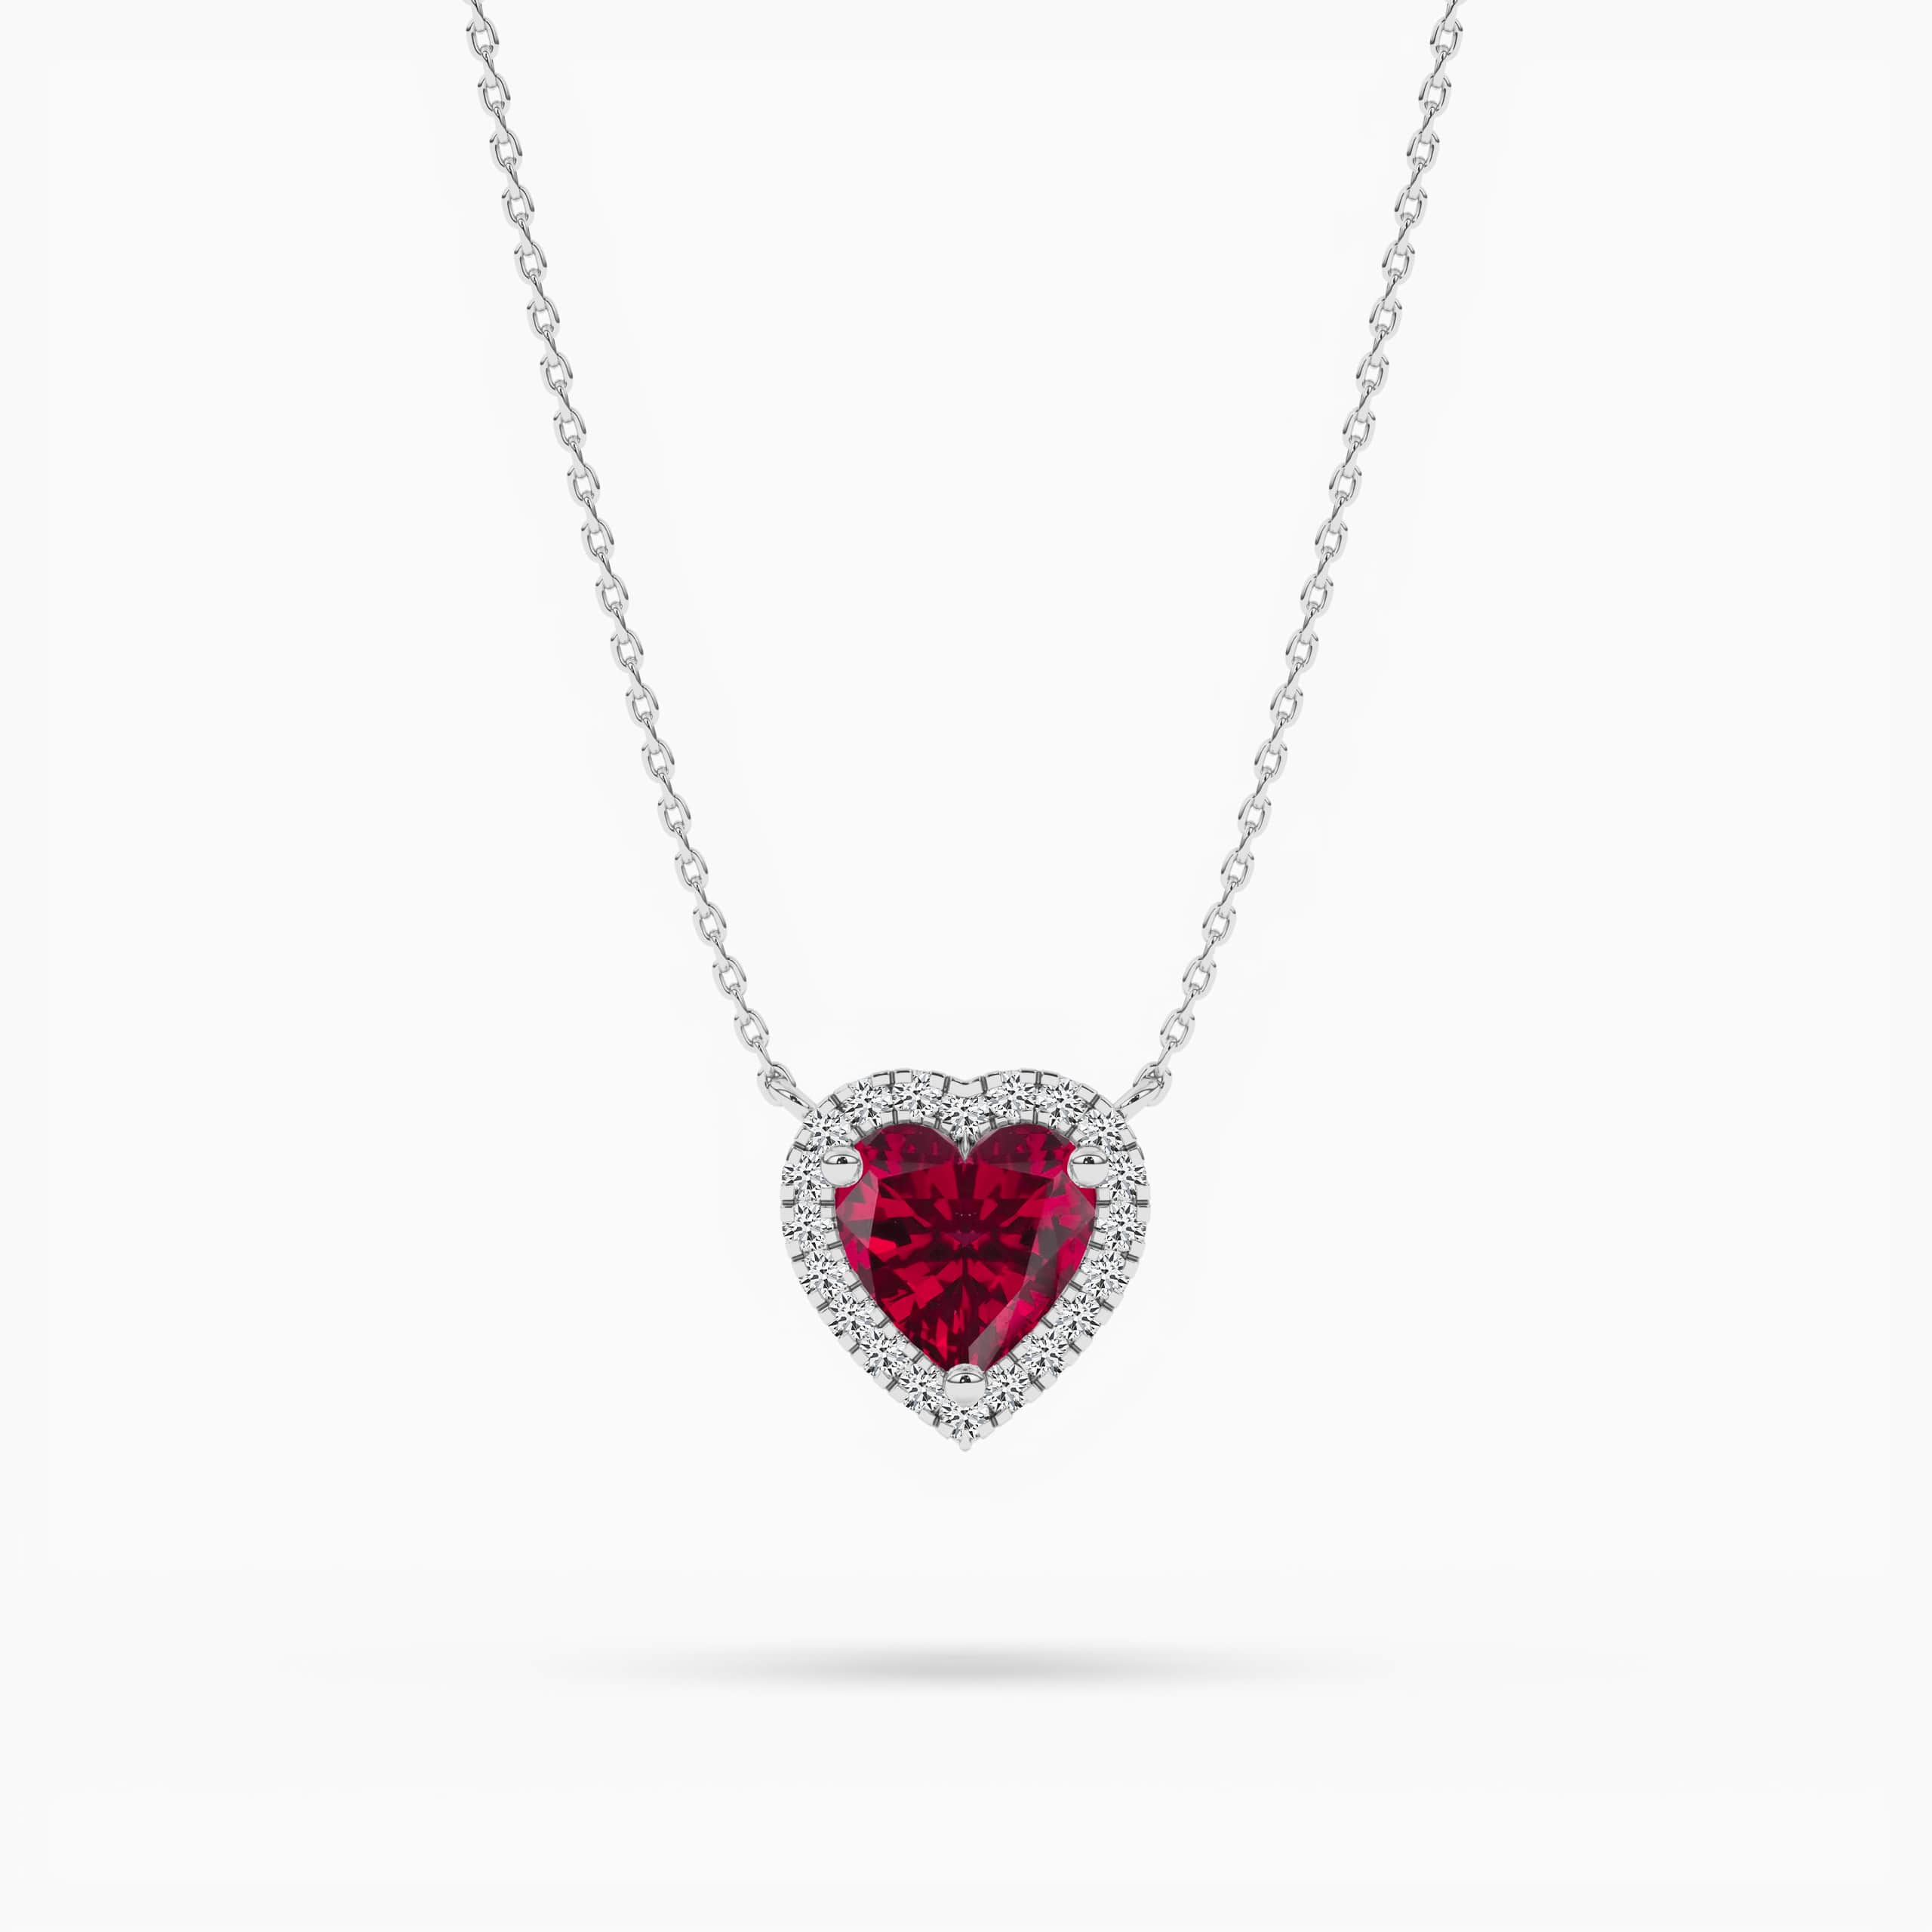 WHITE GOLD HEART SHAPE HALO RUBY NECKLACE